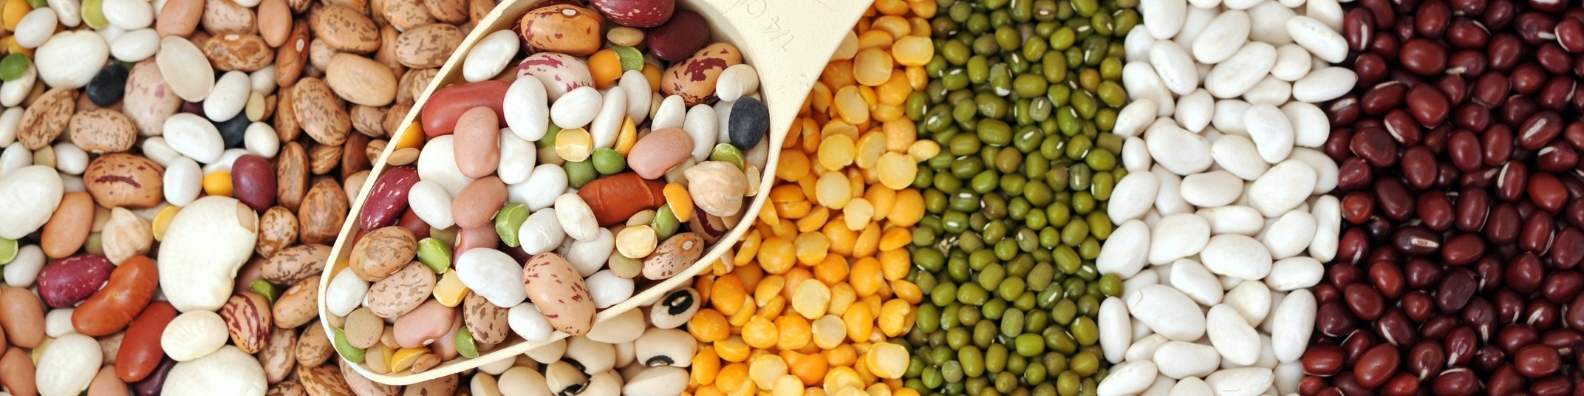 Beans 101: Australia's Sustainable, Nutritious, and Affordable Protein Source